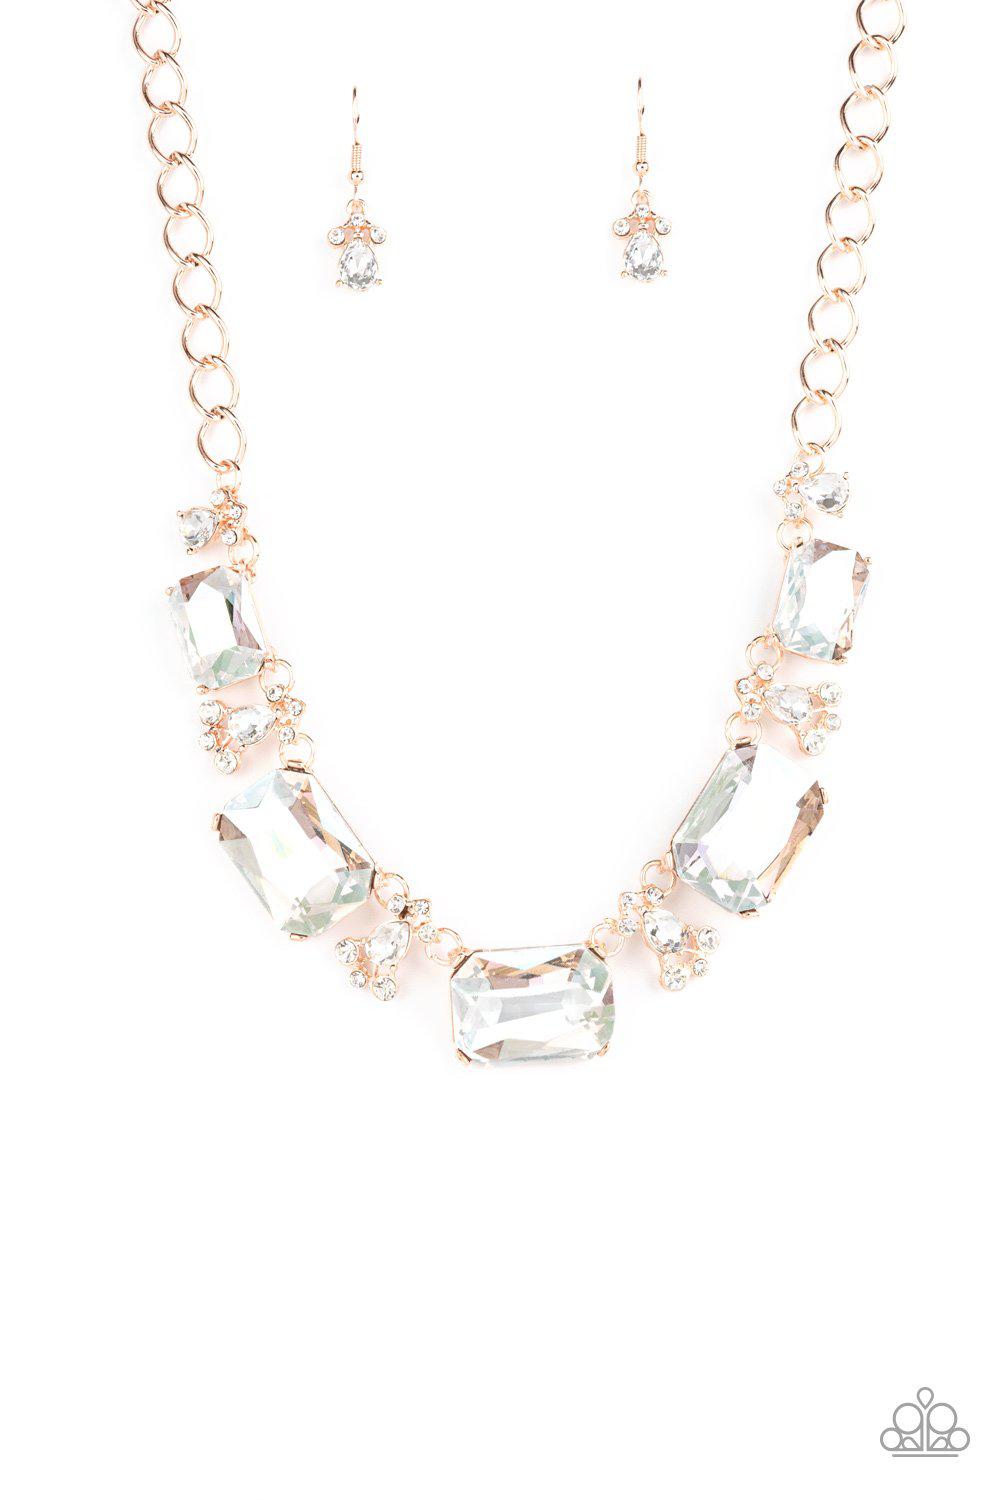 Flawlessly Famous Multi Iridescent Rhinestone and Rose Gold Necklace - Paparazzi Accessories Life of the Party Exclusive September 2021- lightbox - CarasShop.com - $5 Jewelry by Cara Jewels